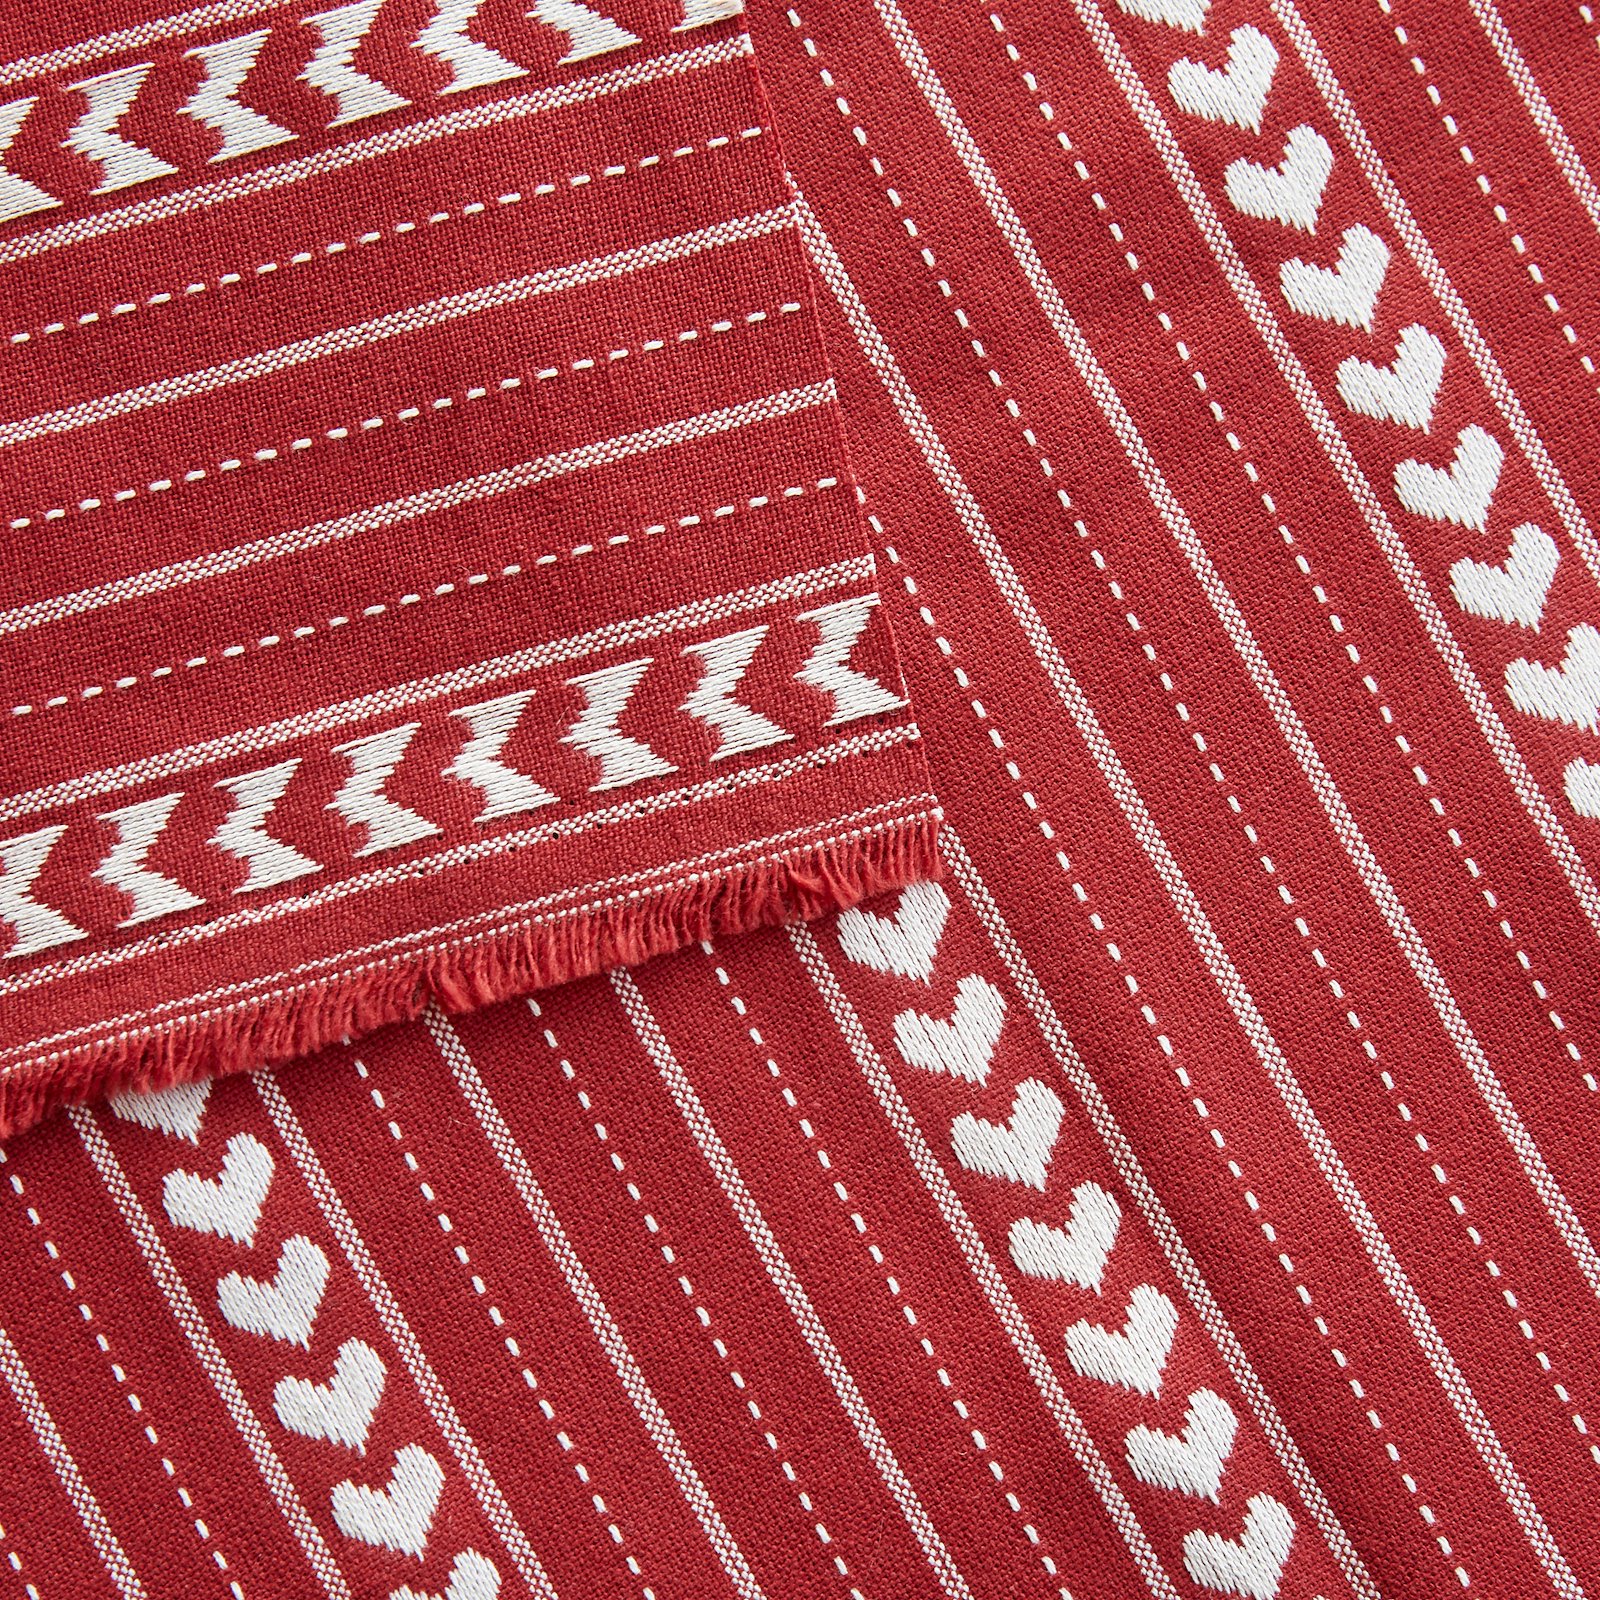 Woven cotton red w YD stripes and hearts 816314_pack_b